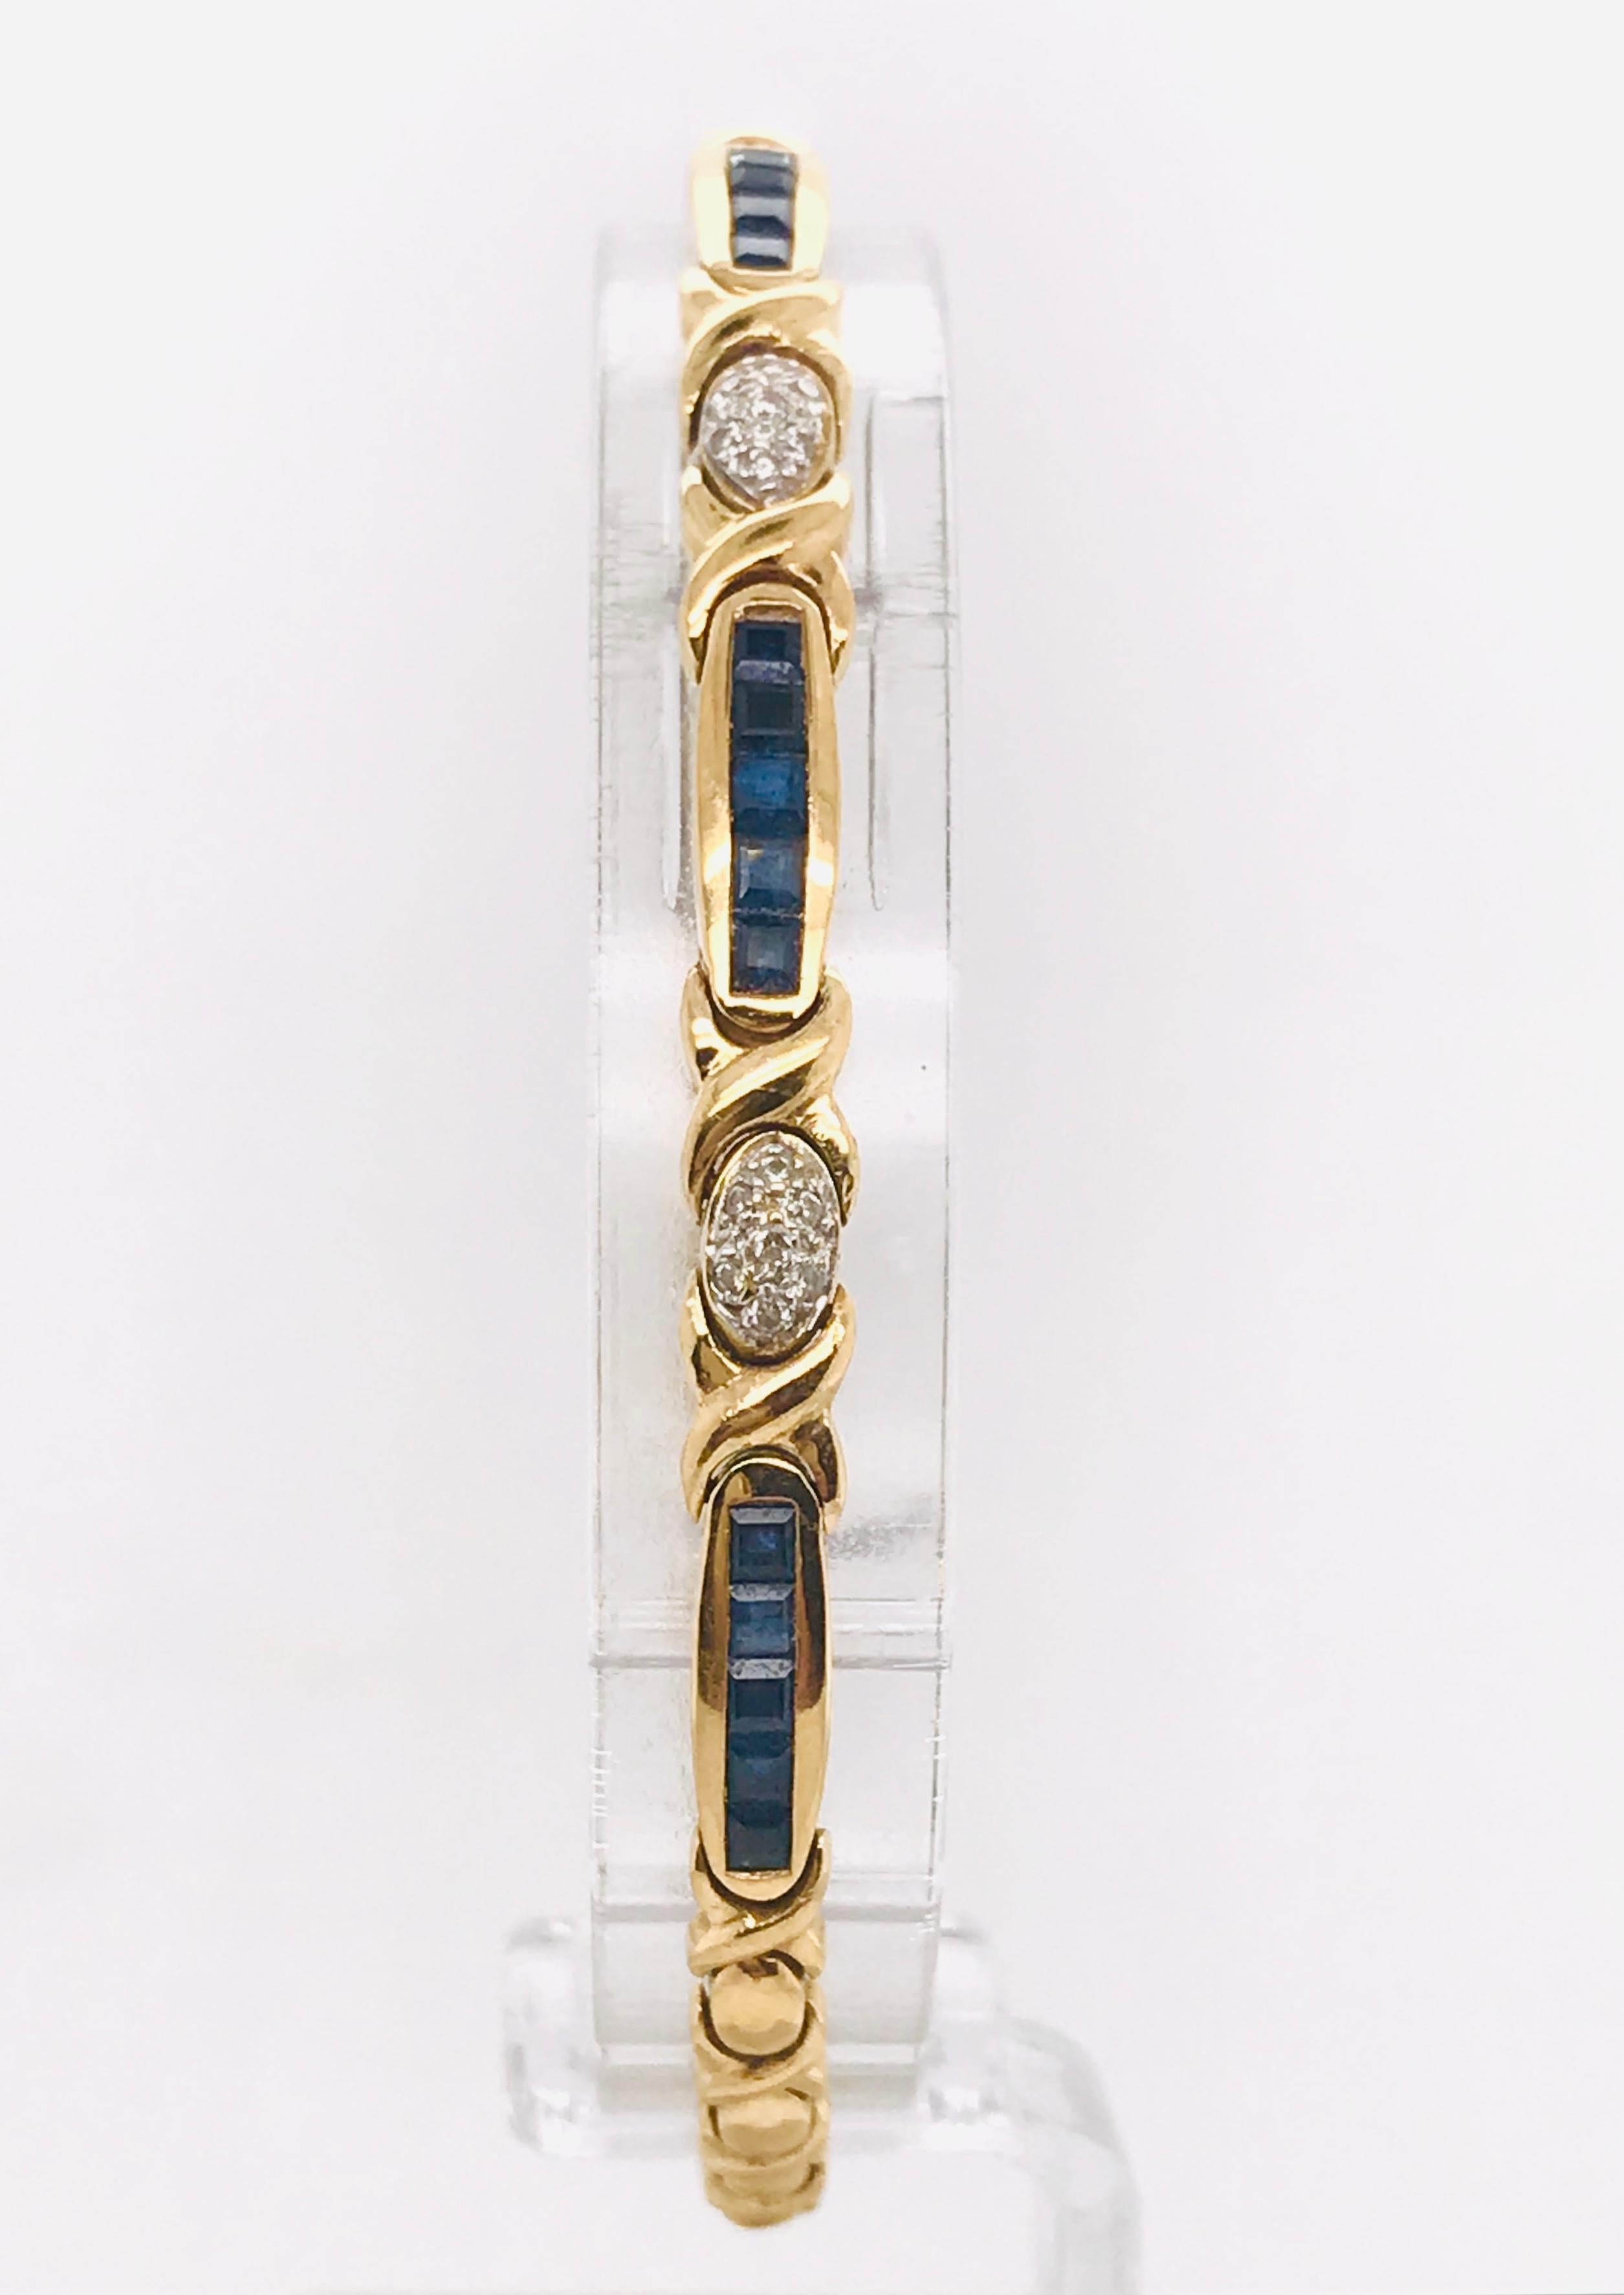 Brilliant Cut Yellow Gold 18 Carat Bracelet with Sapphires and Diamonds